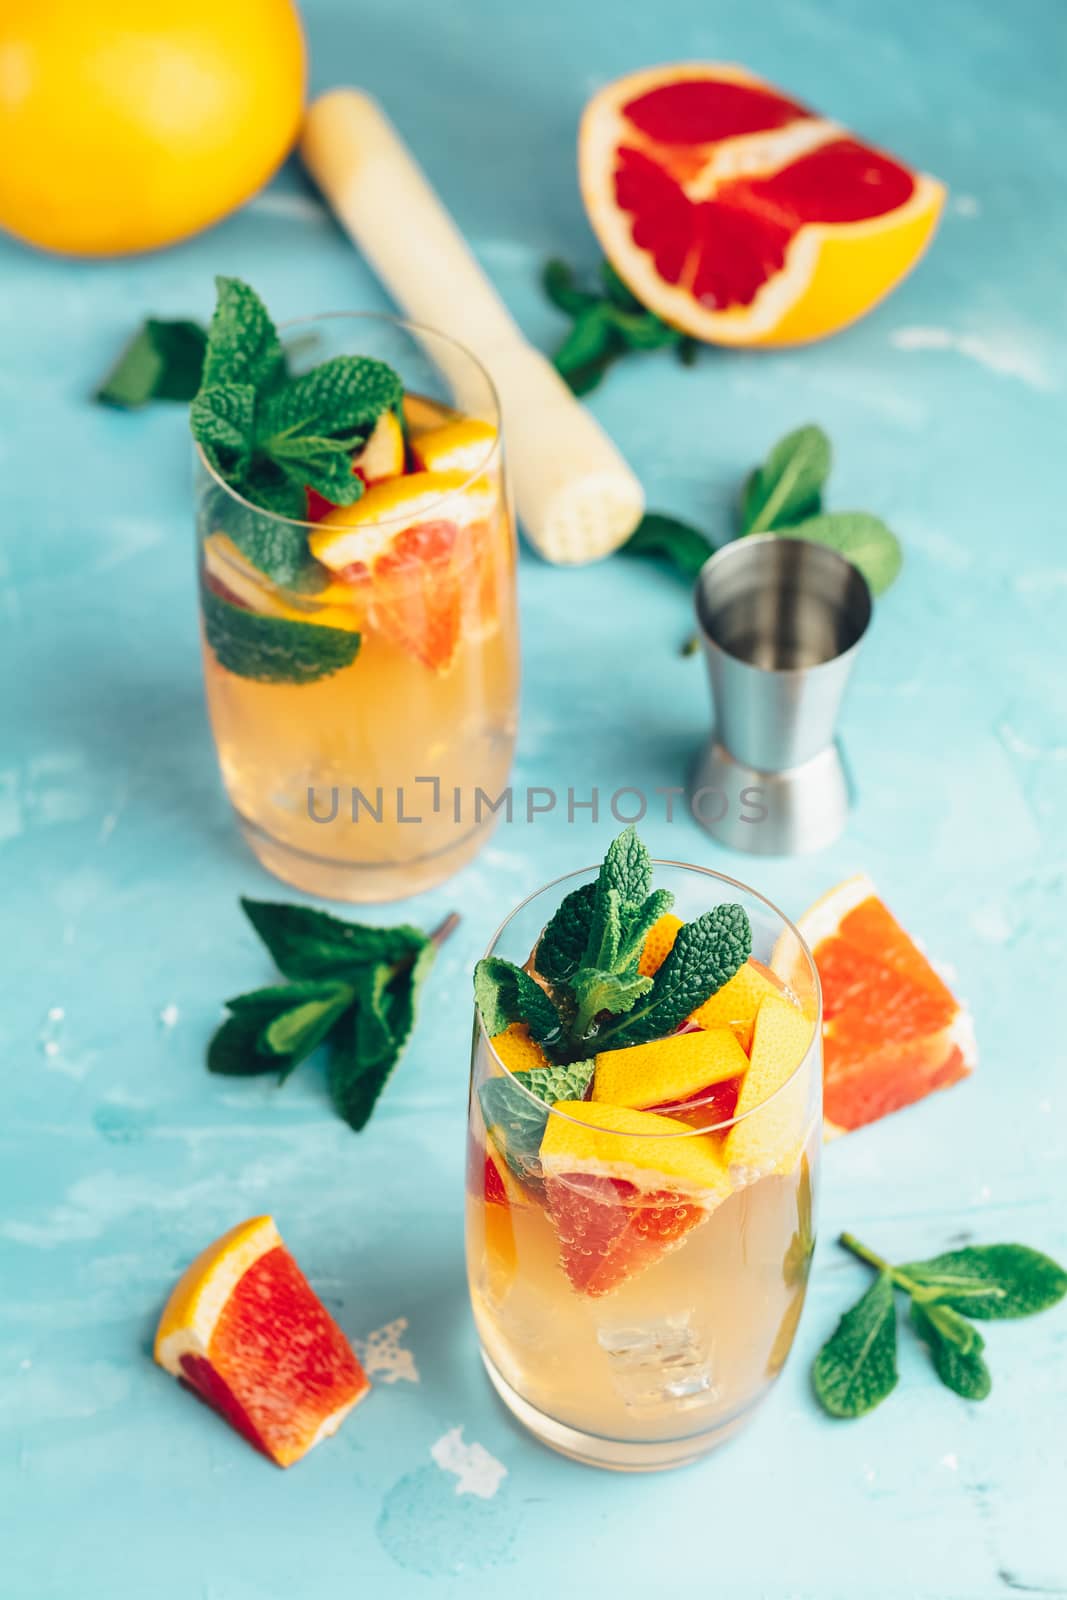 Grapefruit and fresh mint cocktail with juice by ArtSvitlyna